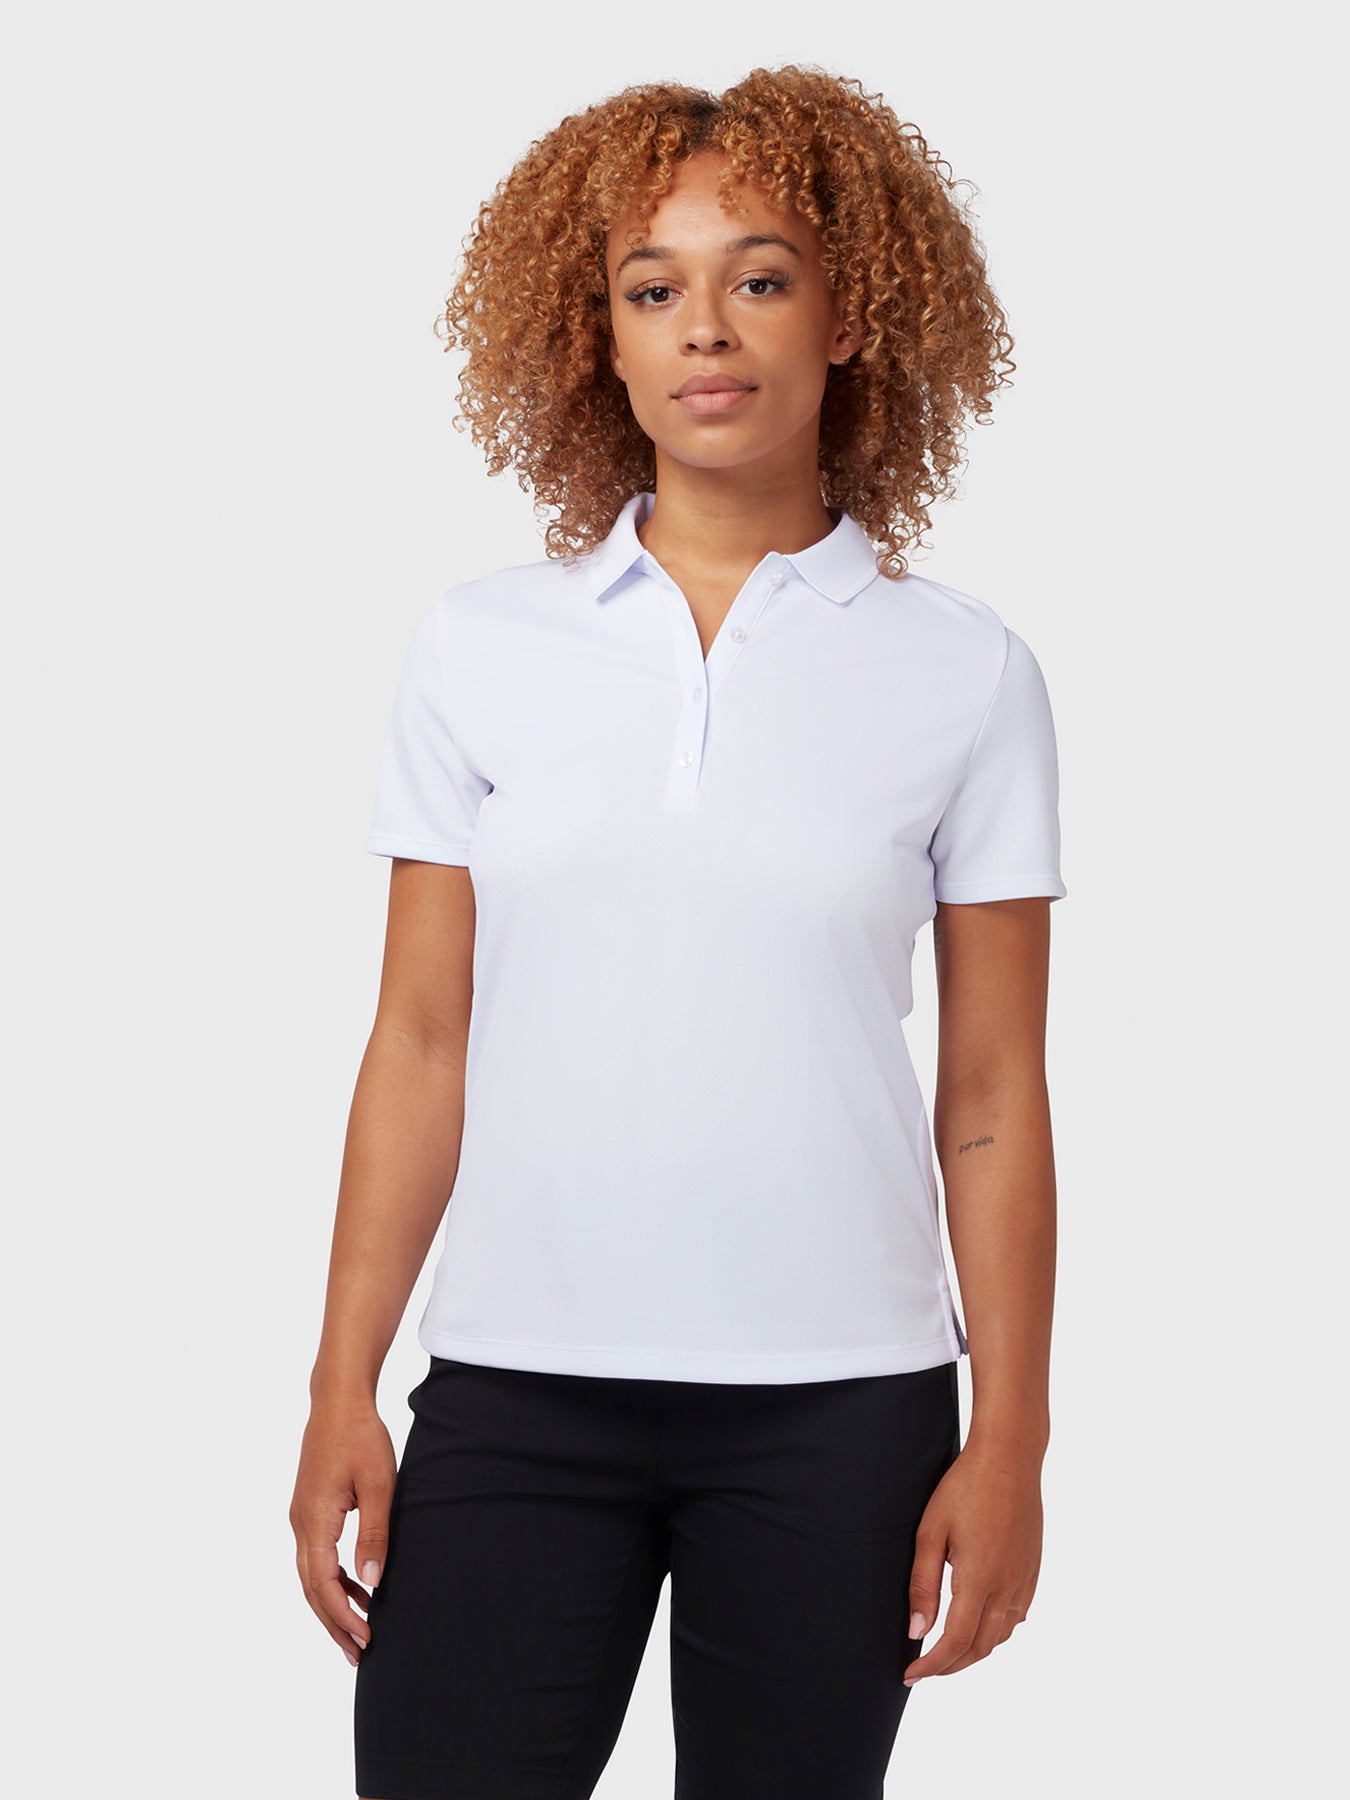 View Swing Tech Womens Polo In Brilliant White information